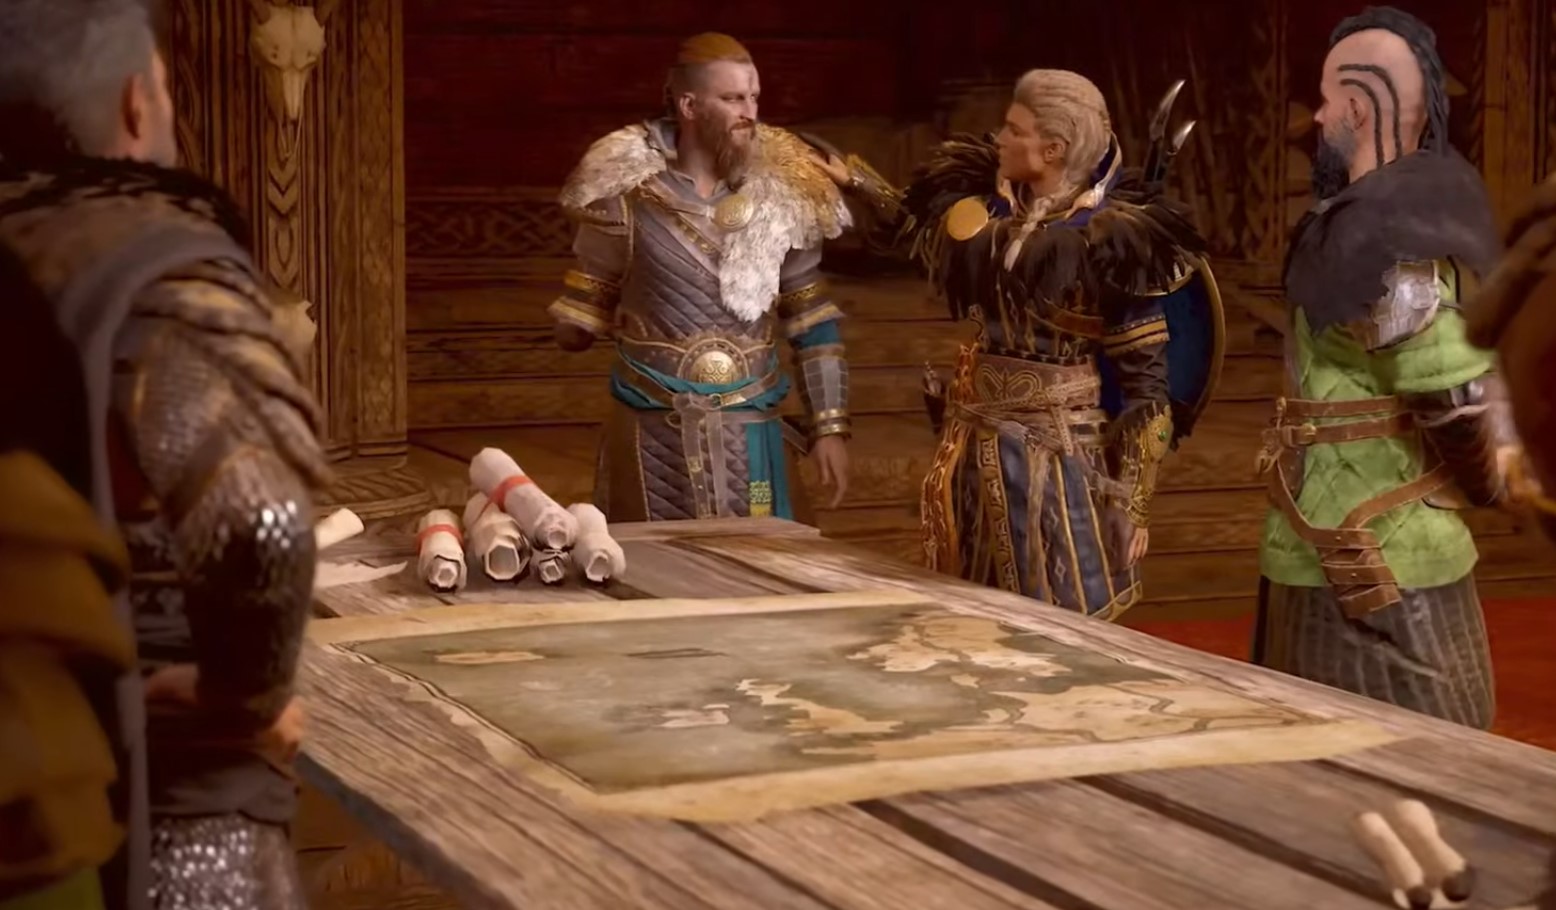 Eivor clasping the shoulder of a one armed man while overlooking a campaign map in the middle of a mead hall.